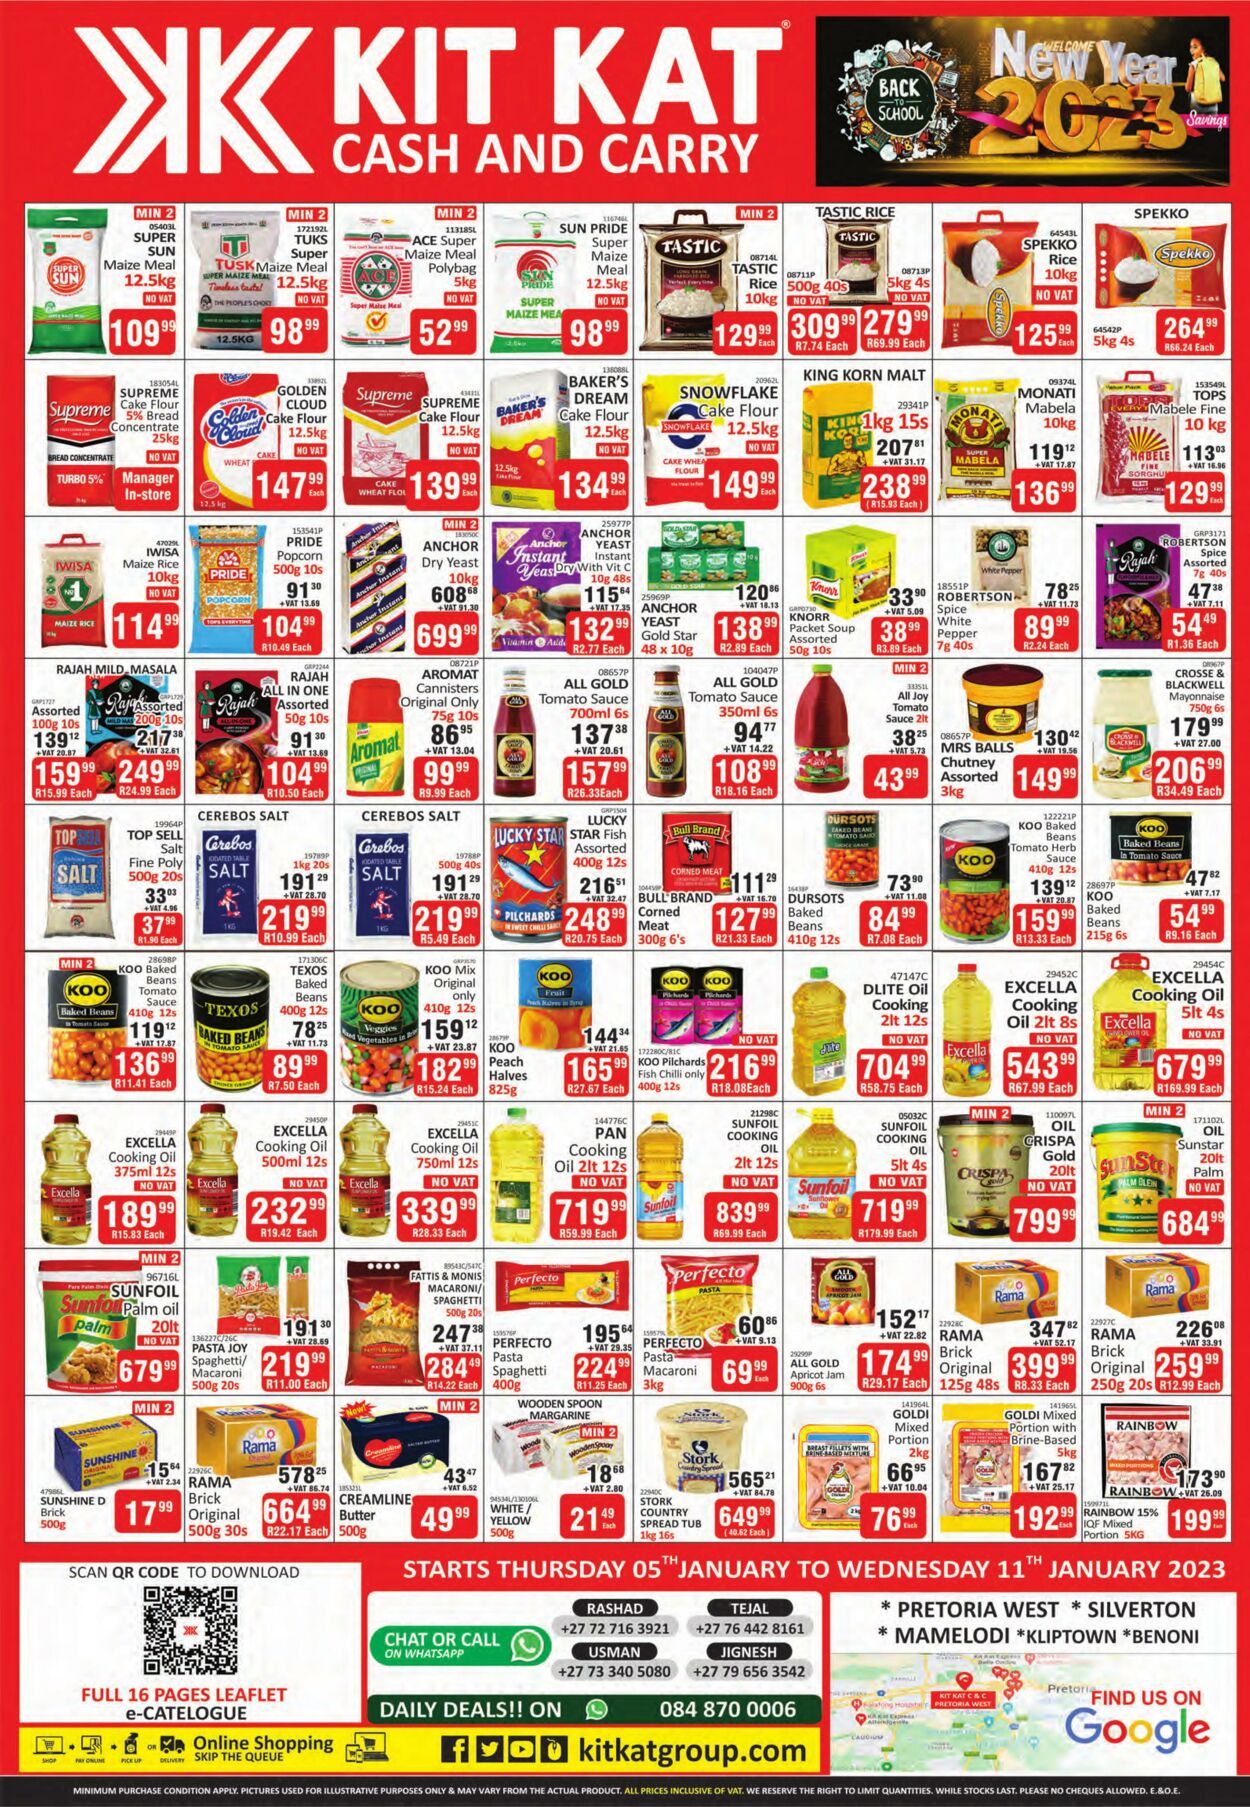 Special Kit Kat Cash and Carry 05.01.2023-11.01.2023